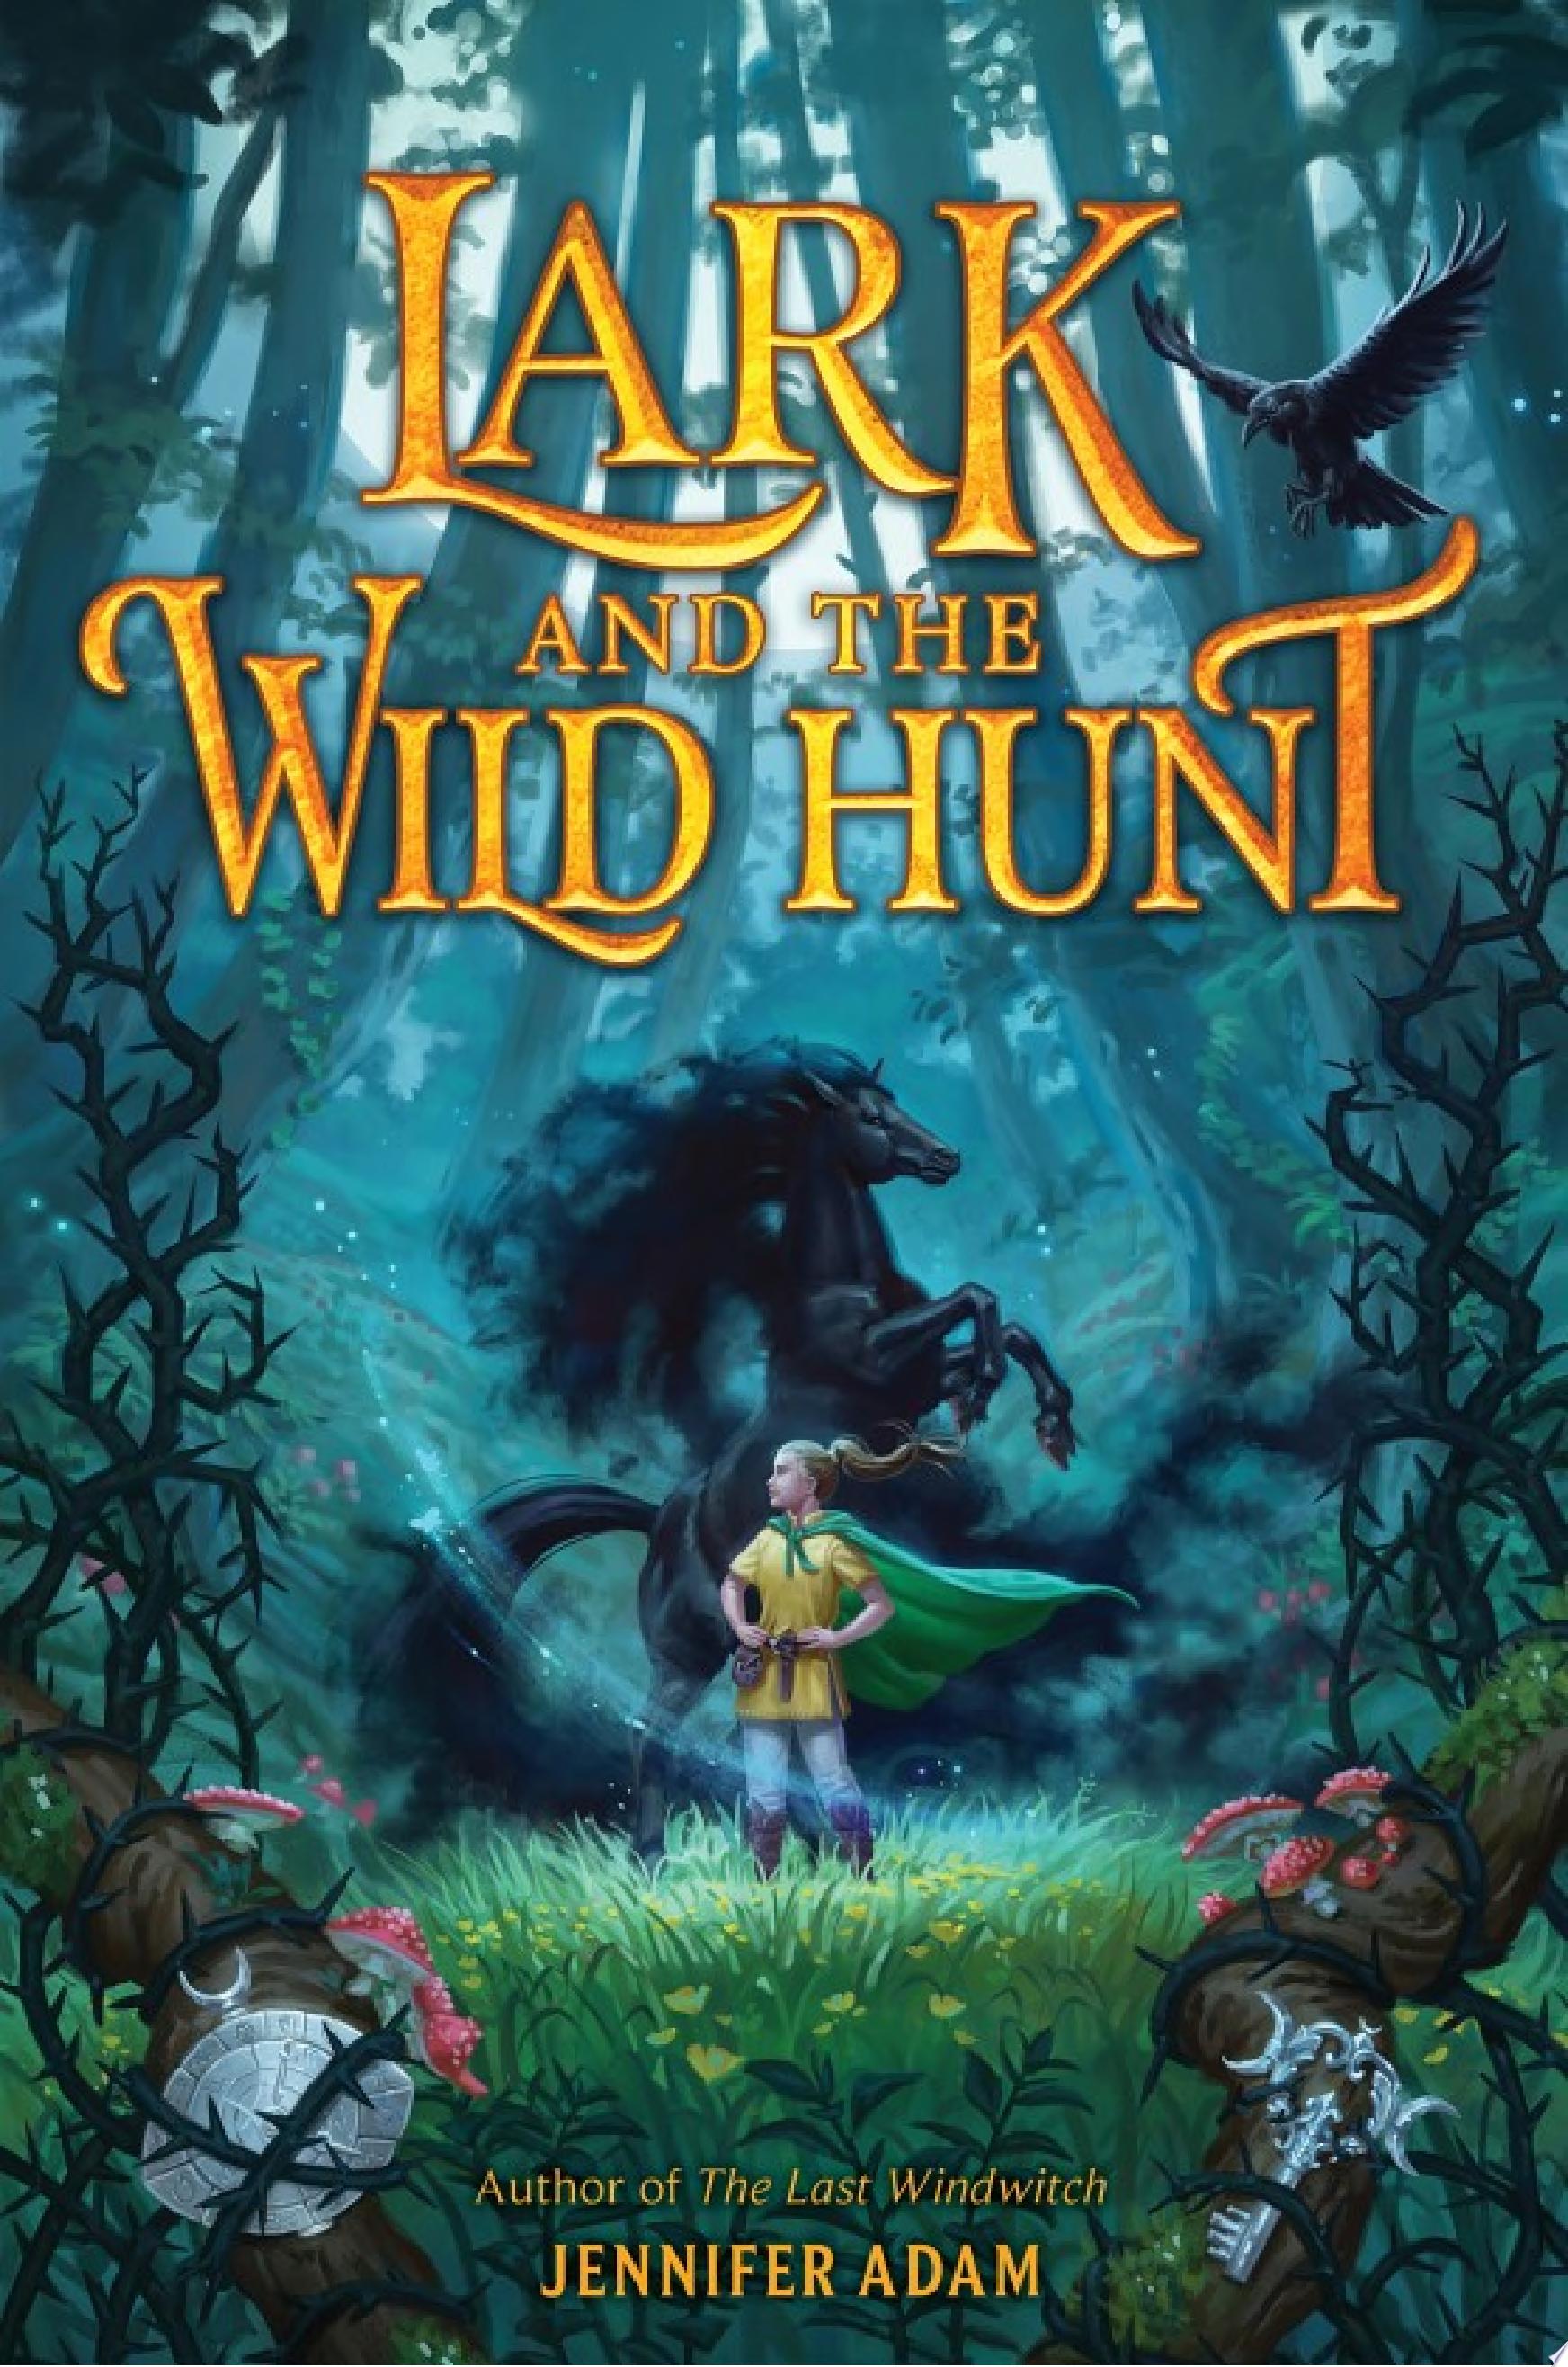 Image for "Lark and the Wild Hunt"